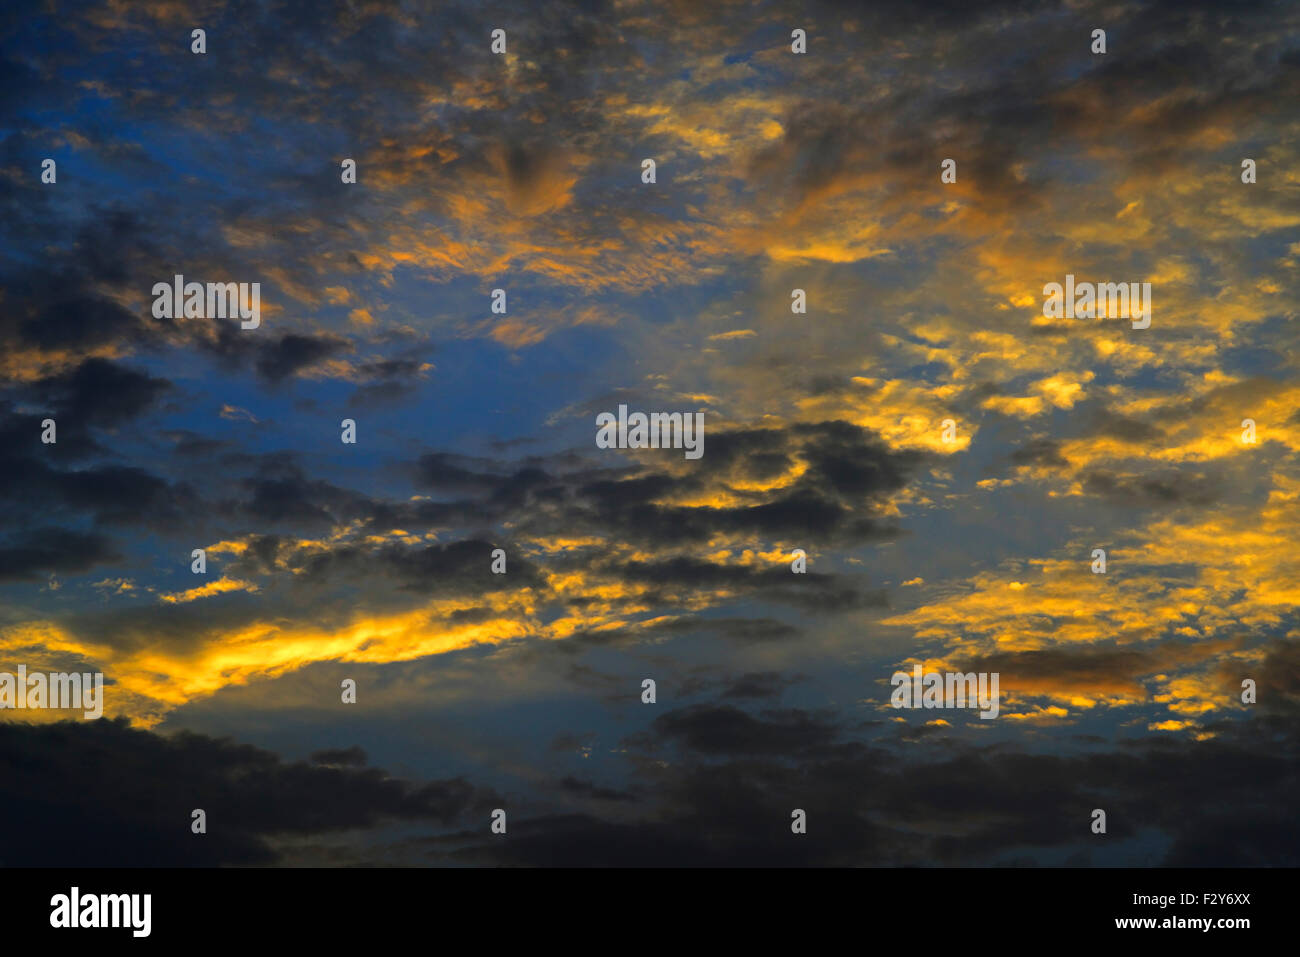 Dramatic Sunlight with Vivid Clouds in Sky. Stock Photo